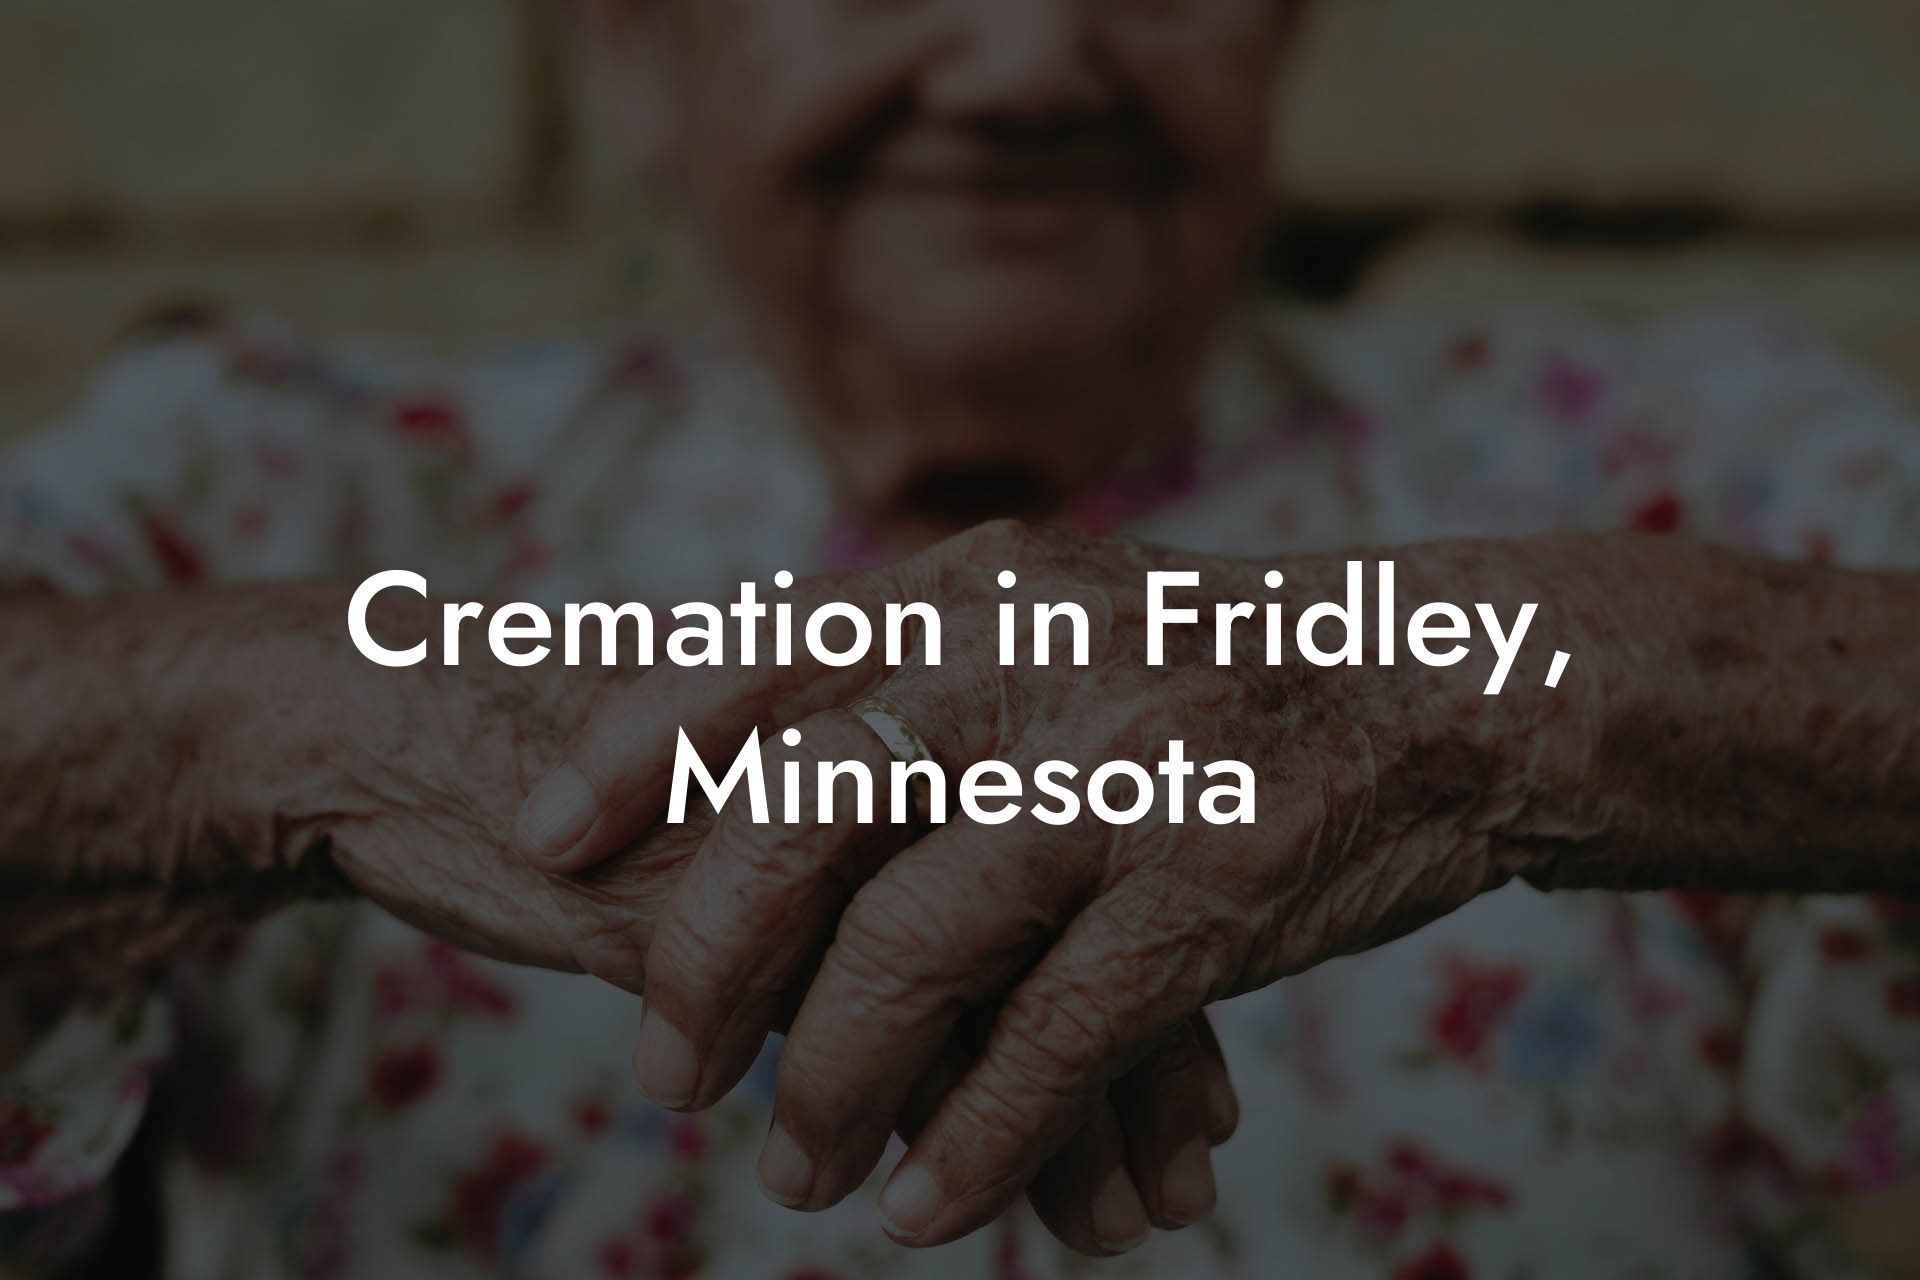 Cremation in Fridley, Minnesota